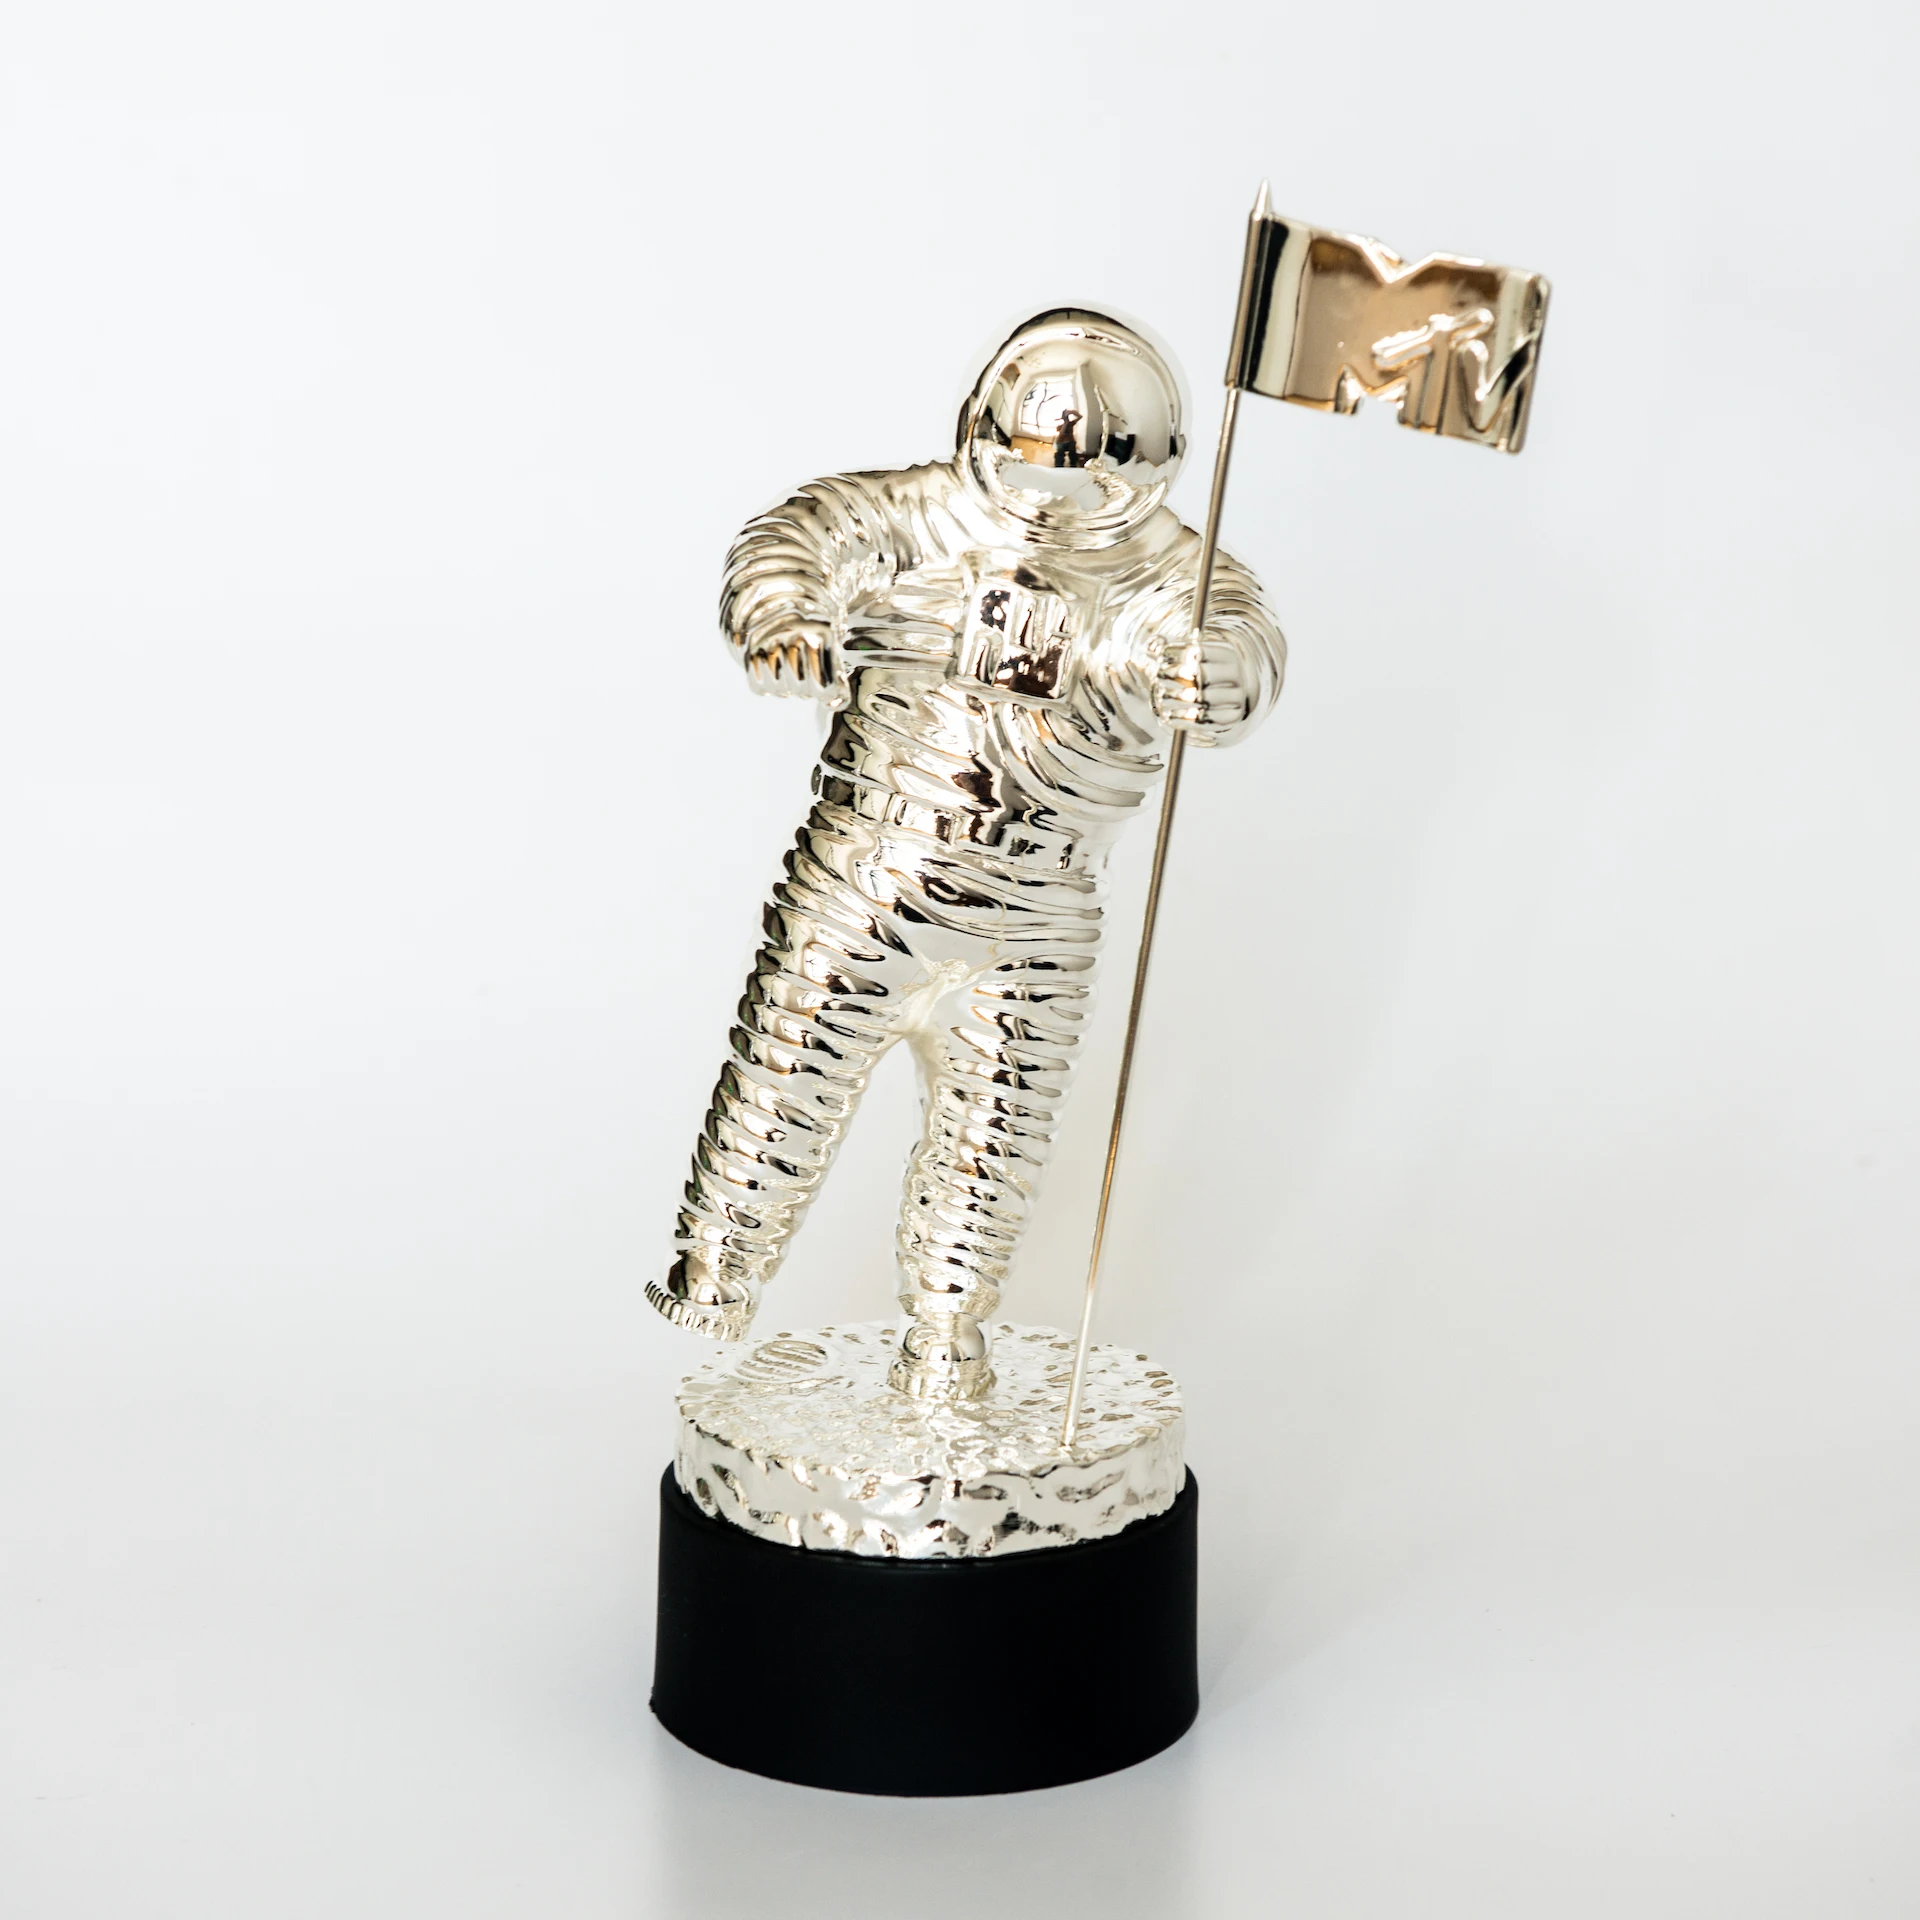 Details about   2020 Gold MTV Awards Moonman Statue VMA Winner Trophy 12.5" Video Music Awards 